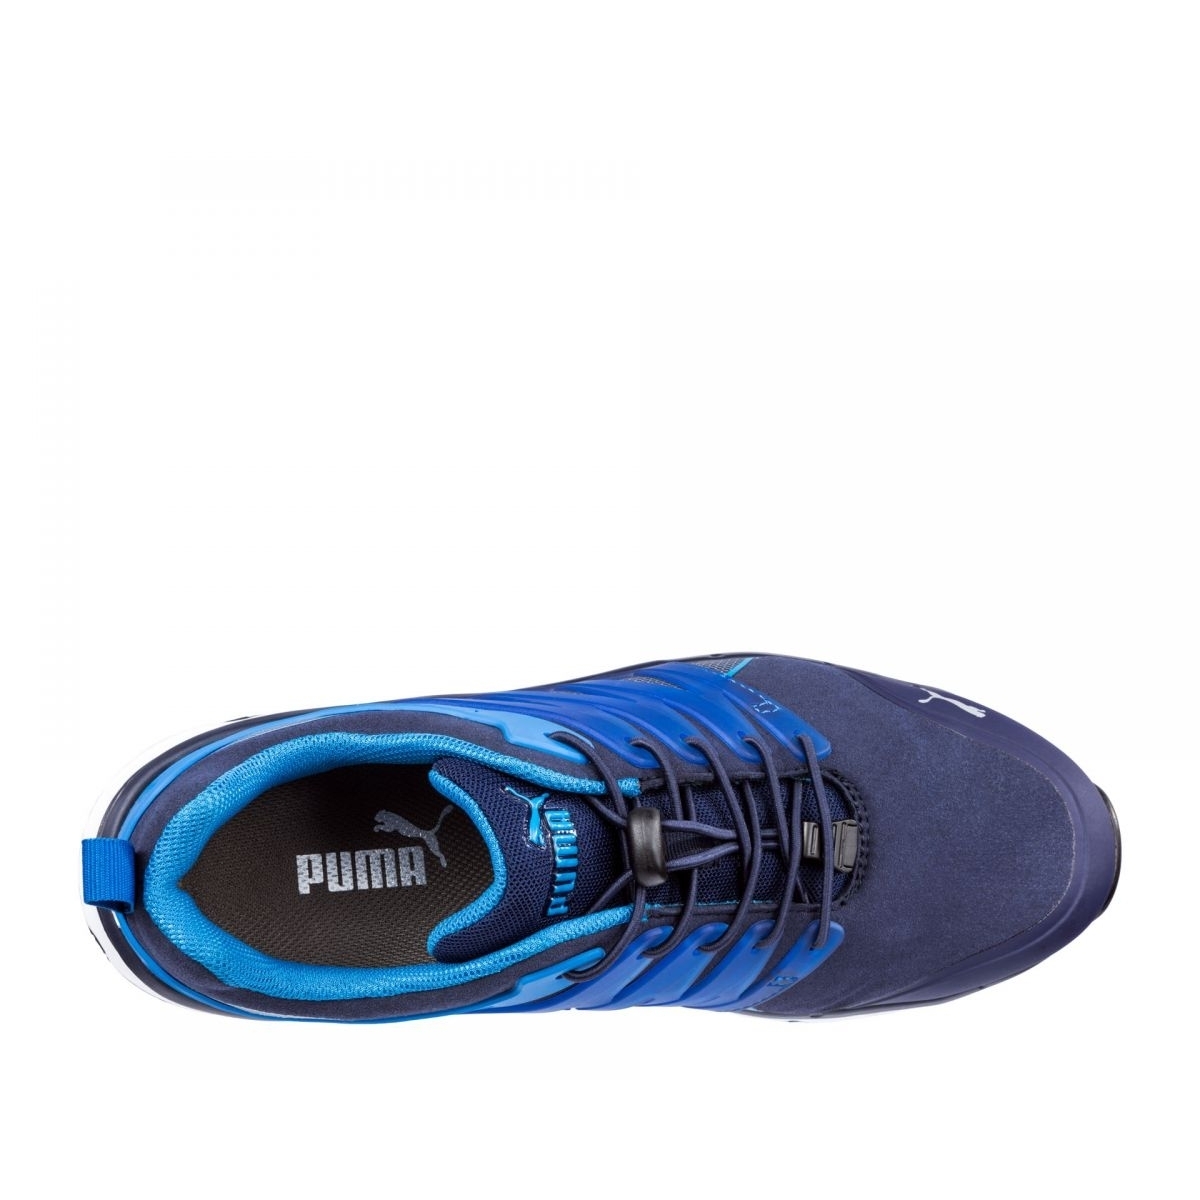 PUMA Safety Velocity 2.0 Blue Low ASTM SD Safety Shoes Safety Toe Metal Free Fiberglass Toe Cap Slip Resistant Men ONE - image 3 of 5